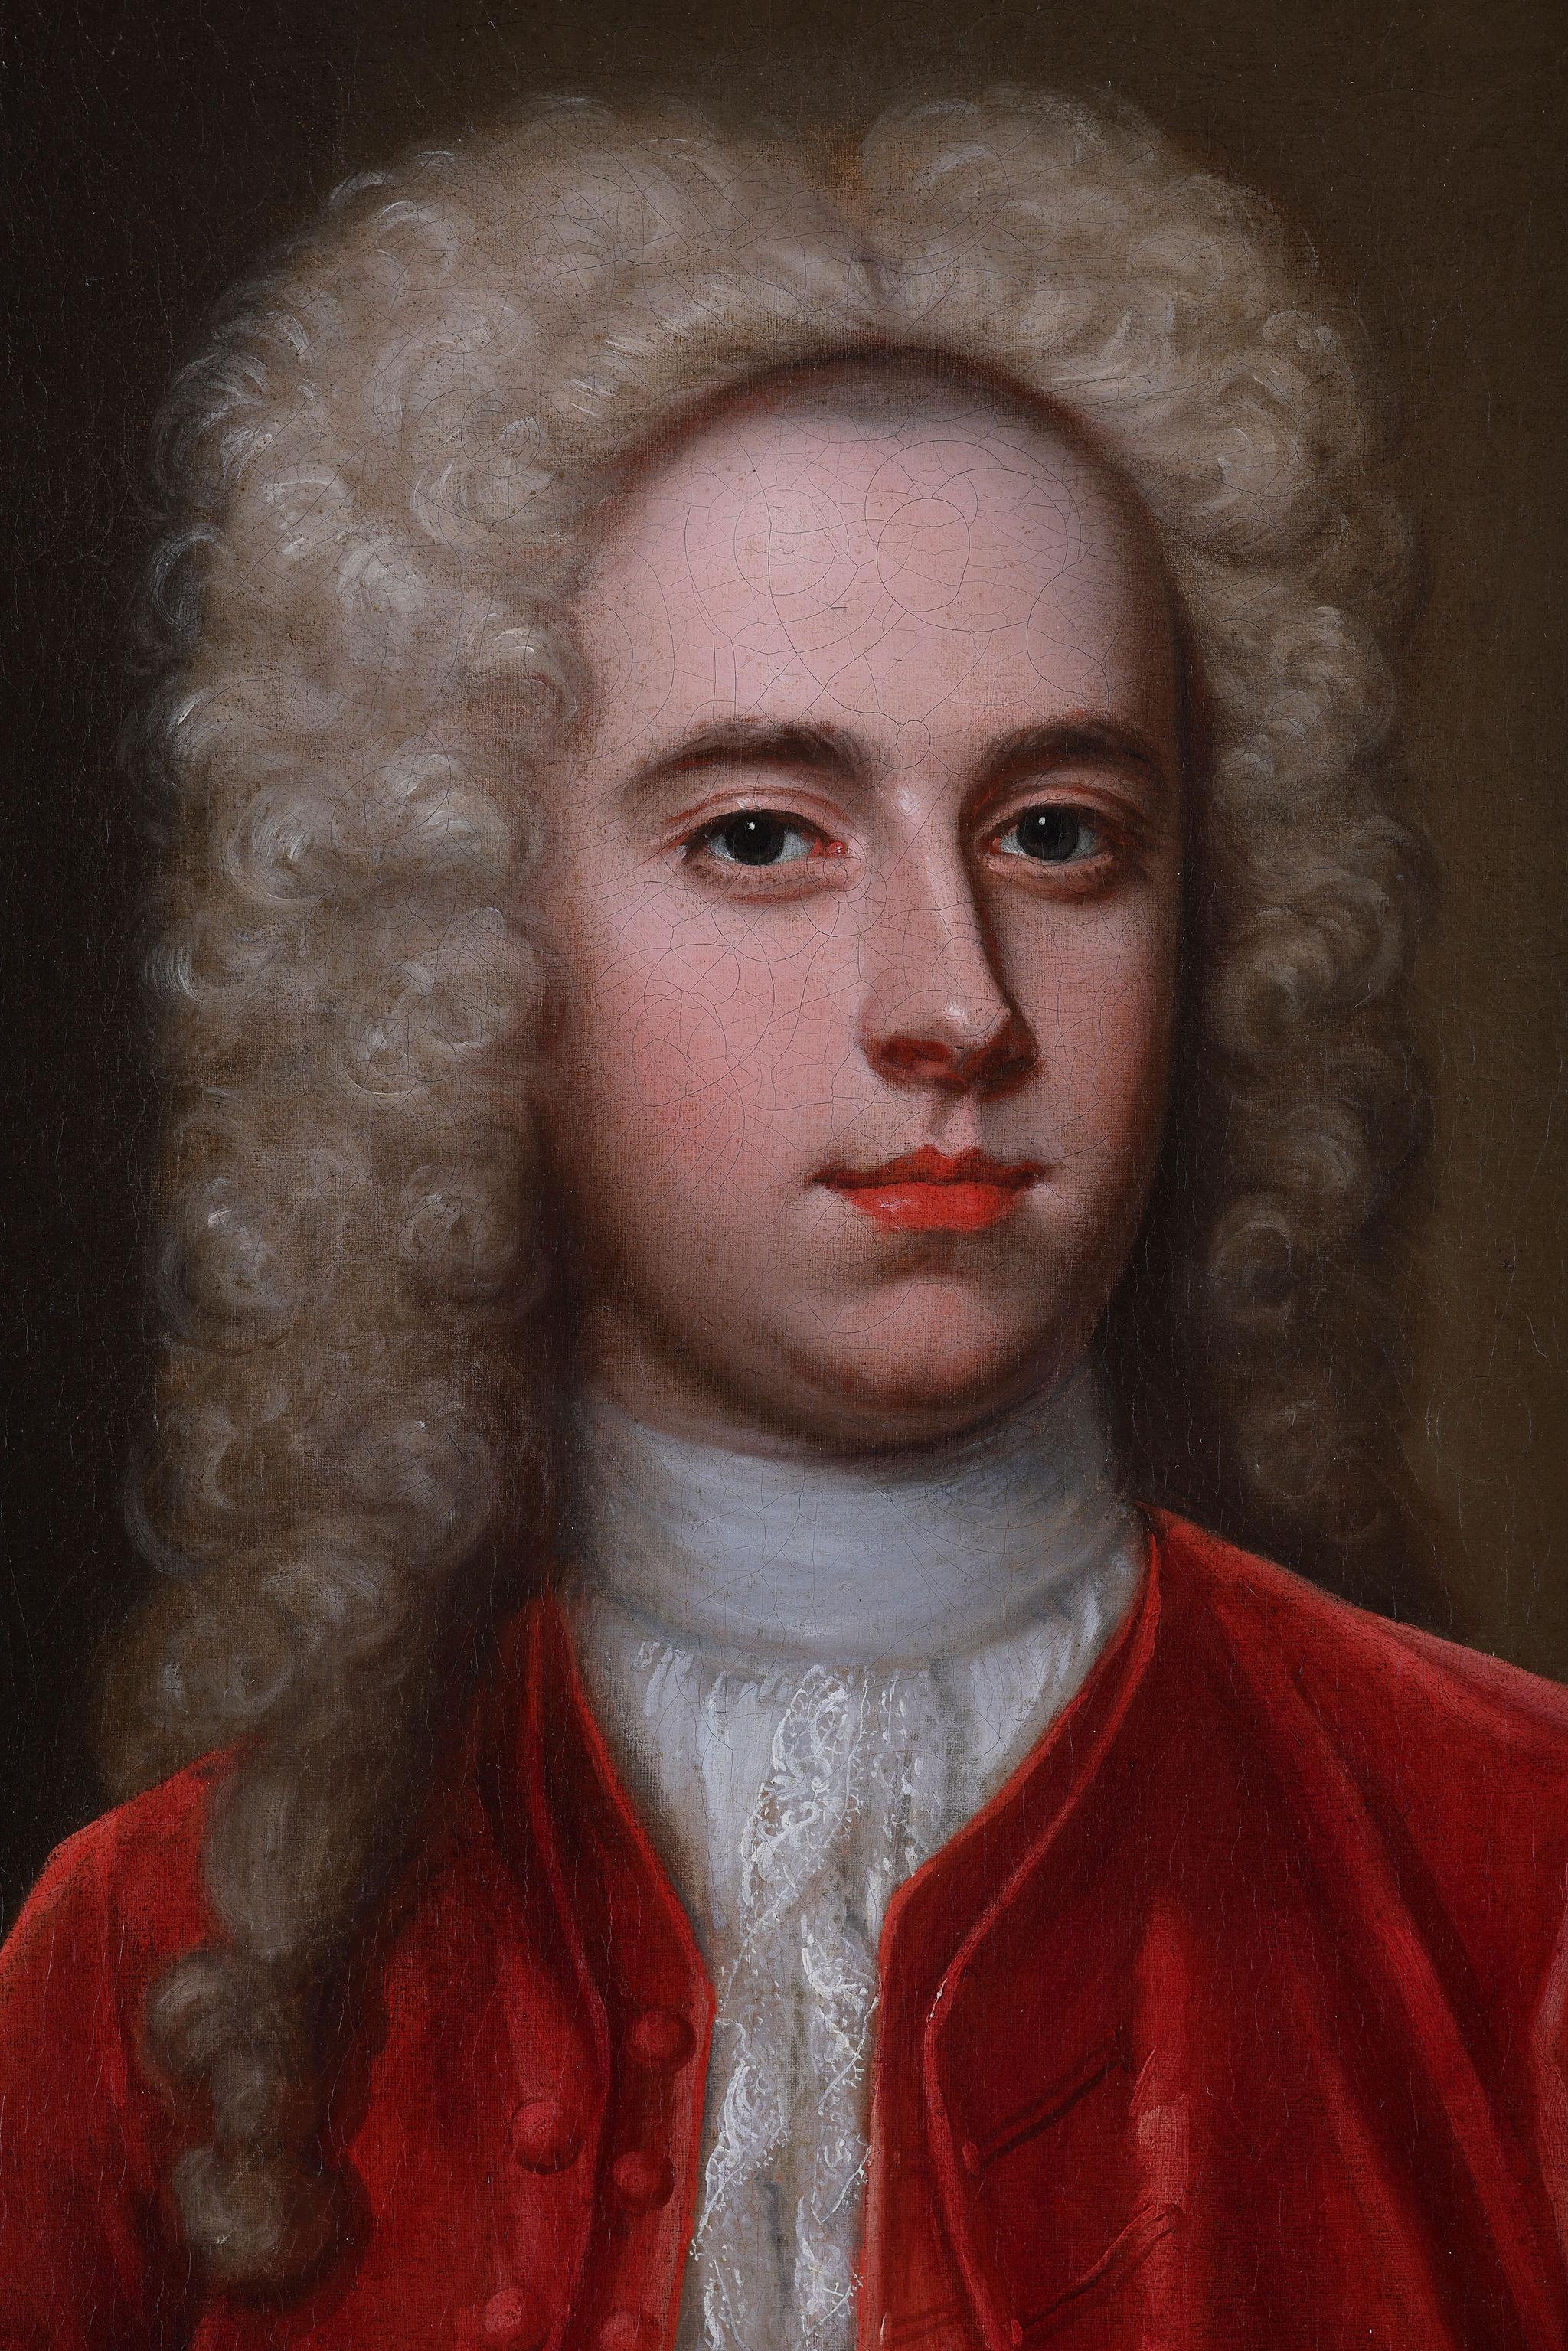 Portrait of a Man possibly Arthur Viscount Irwin, Temple Newsam Oil on canvas - English School Painting by Charles Jervas